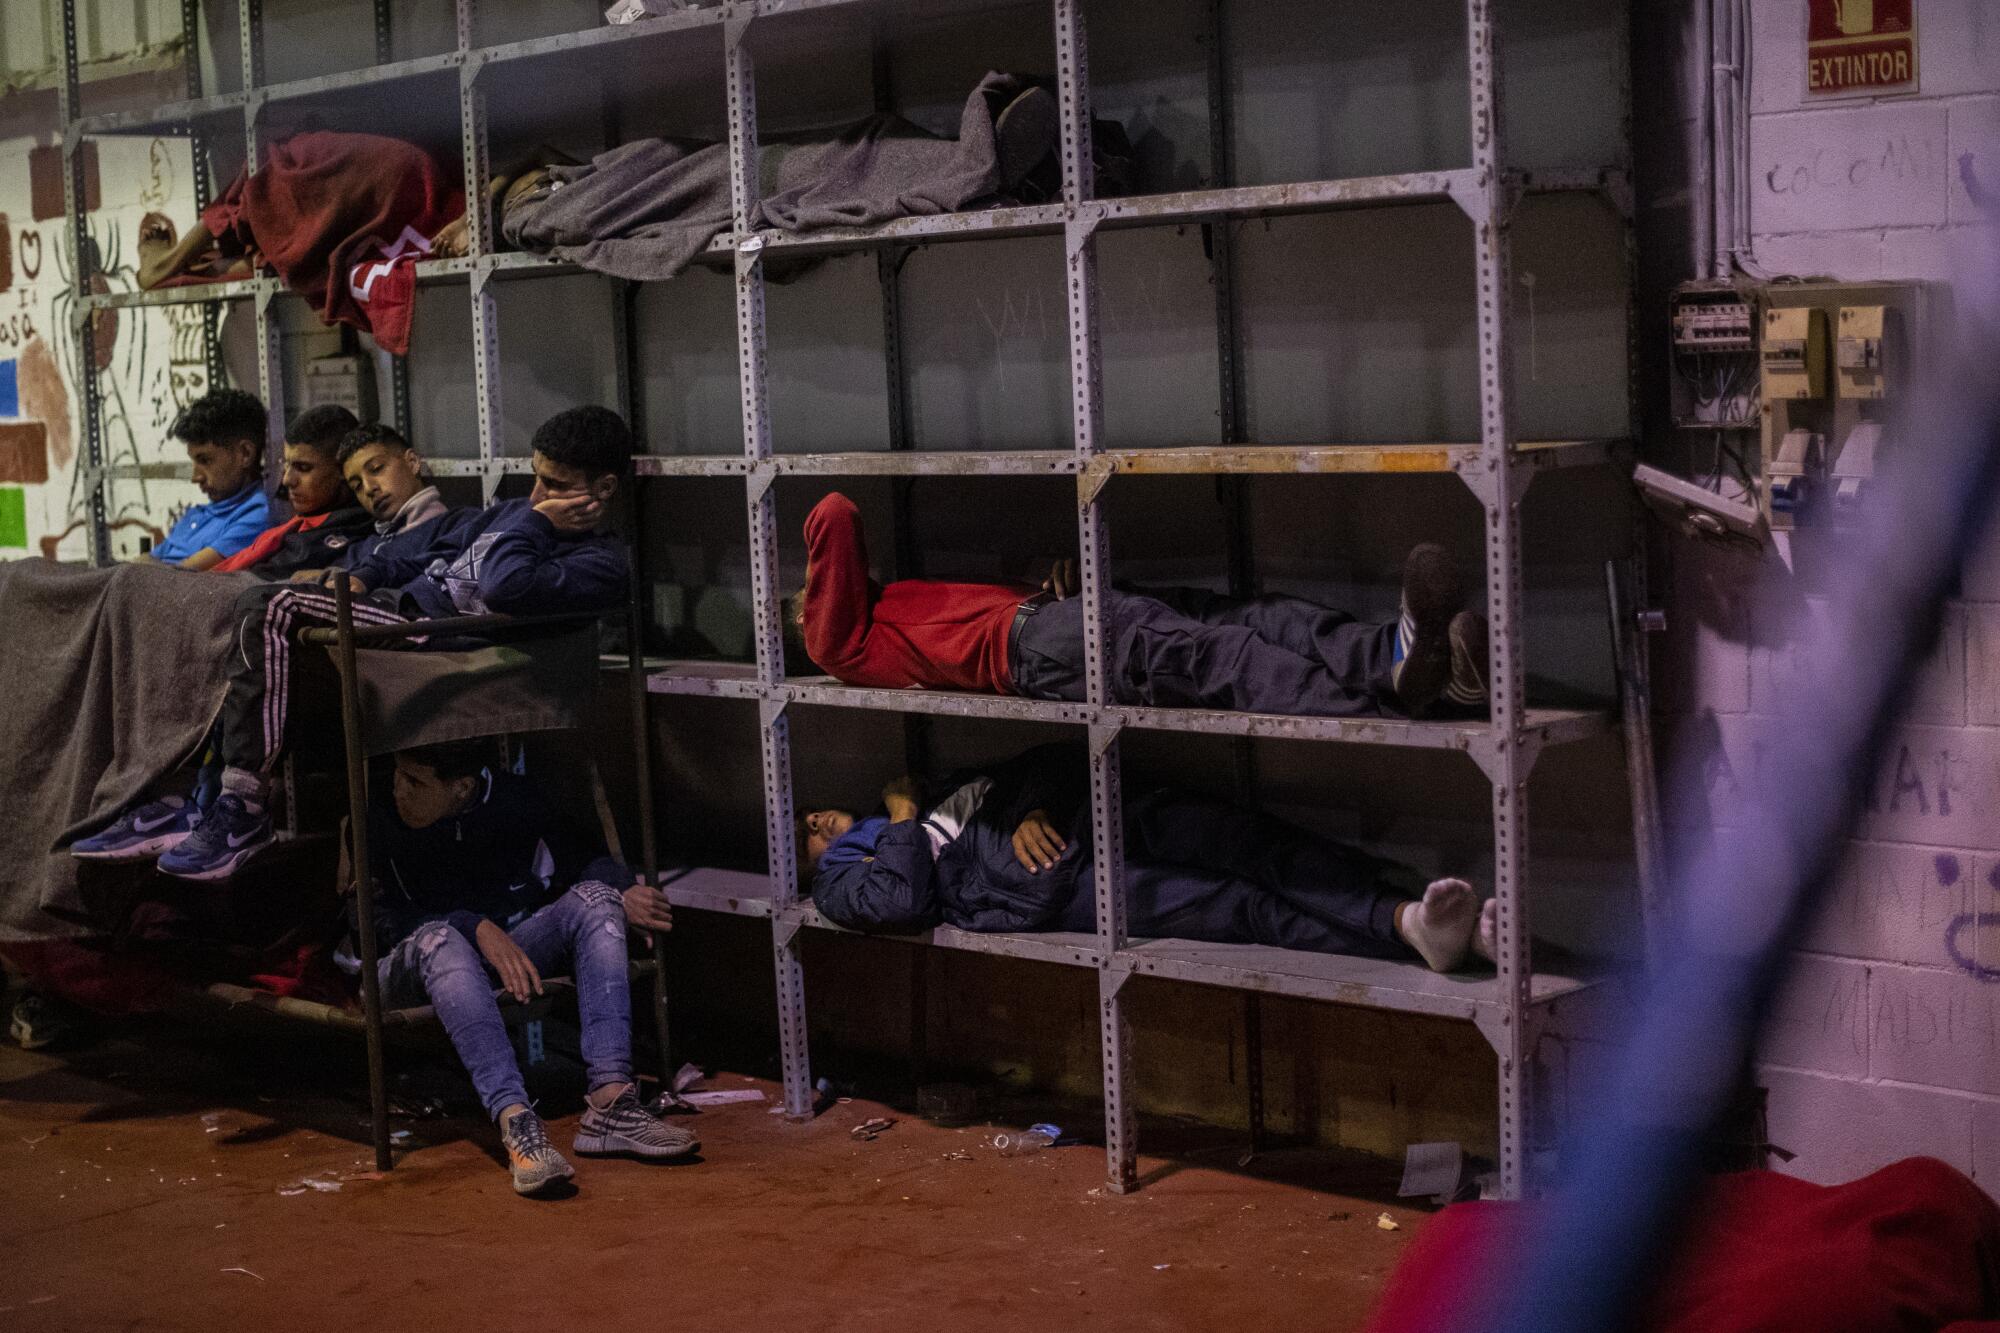 Children and teenage boys huddle together and sleep on cots and metal shelves